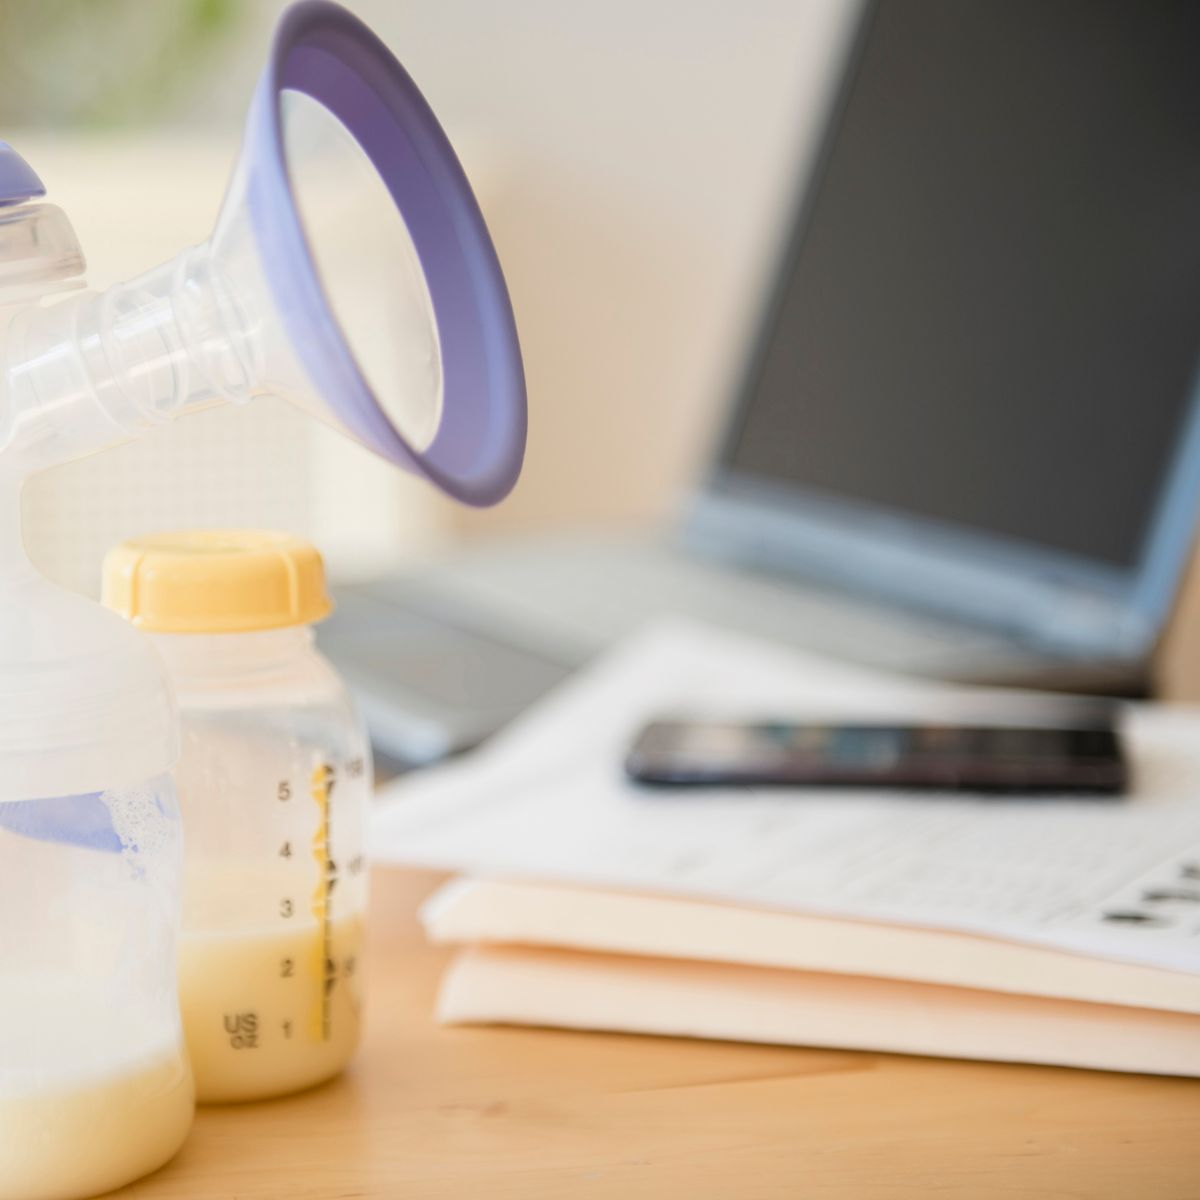 Pumping Breastmilk at Work? Make it a Little Simpler with These Gadgets